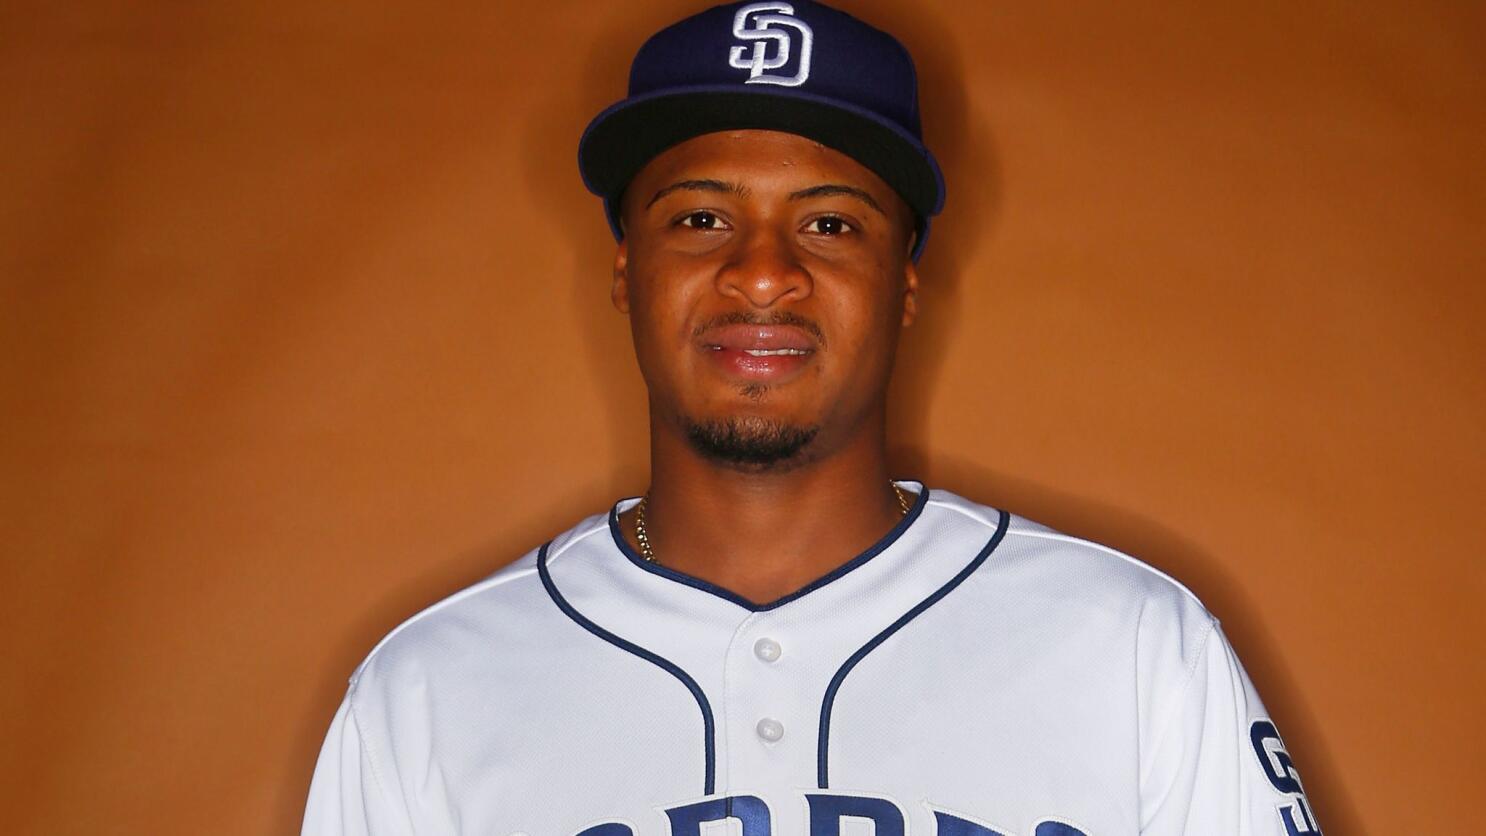 Padres roster review: Dinelson Lamet - The San Diego Union-Tribune